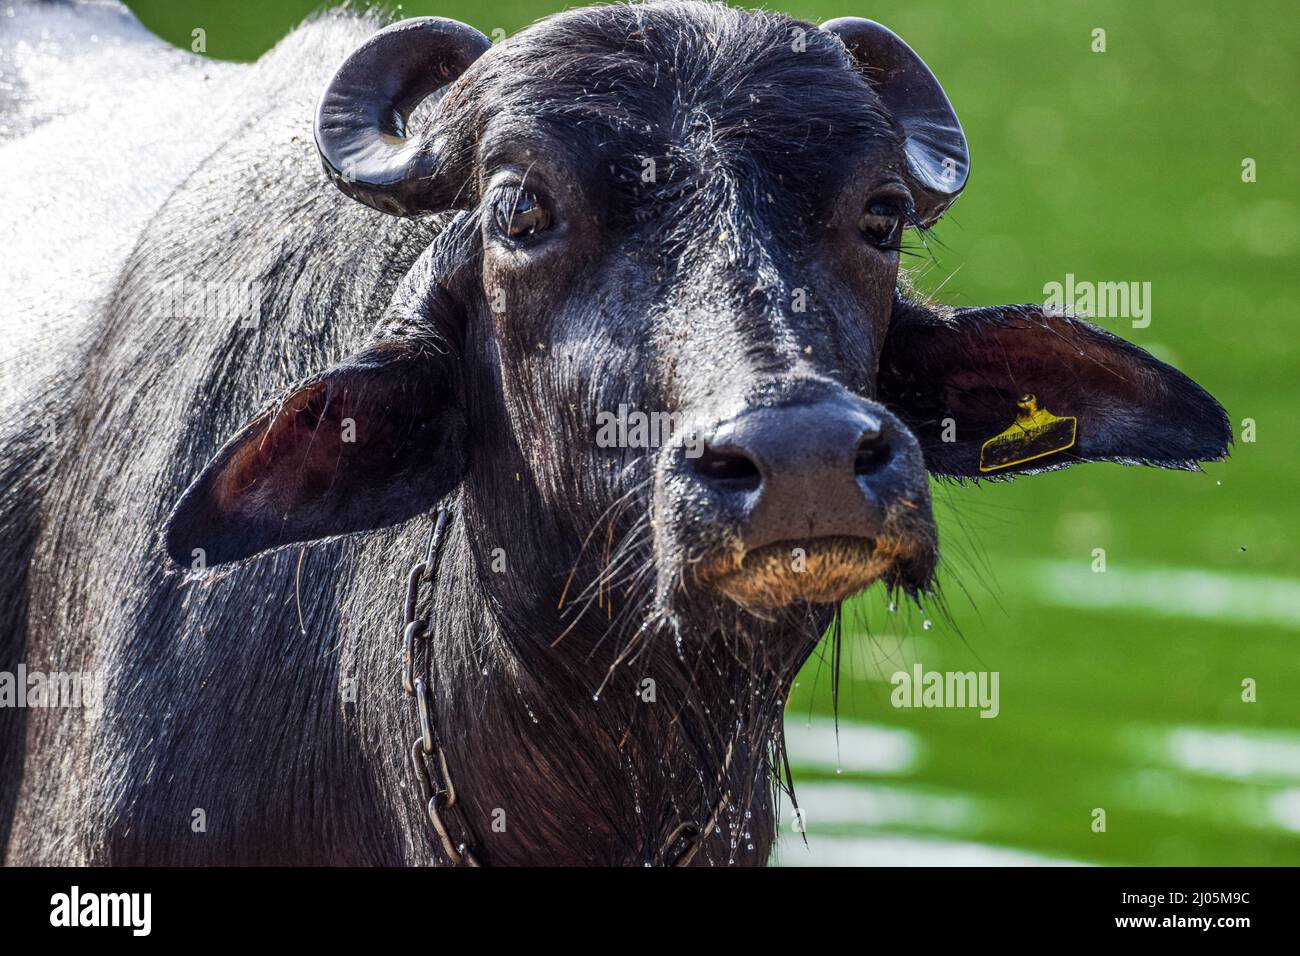 Selective focus closeup of Black buffalo face. Buffalo bathing in river drenched. Animal on riverside Stock Photo